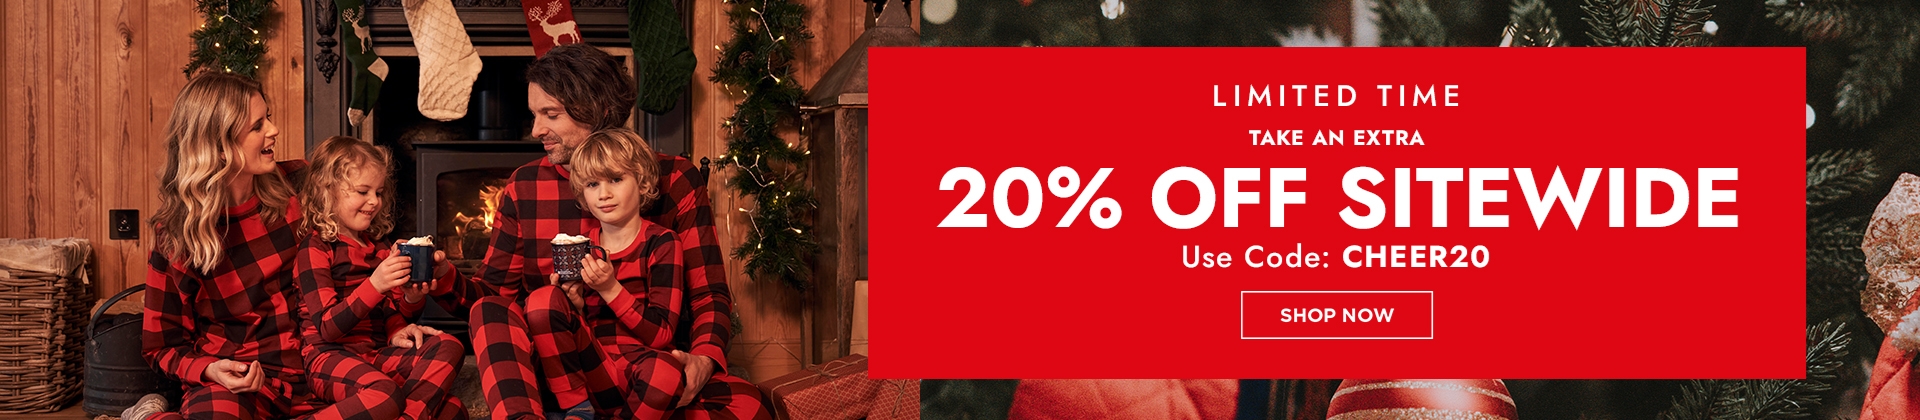 H1:EXTRA 20% OFF SITEWIDE WITH CODE CHEER20